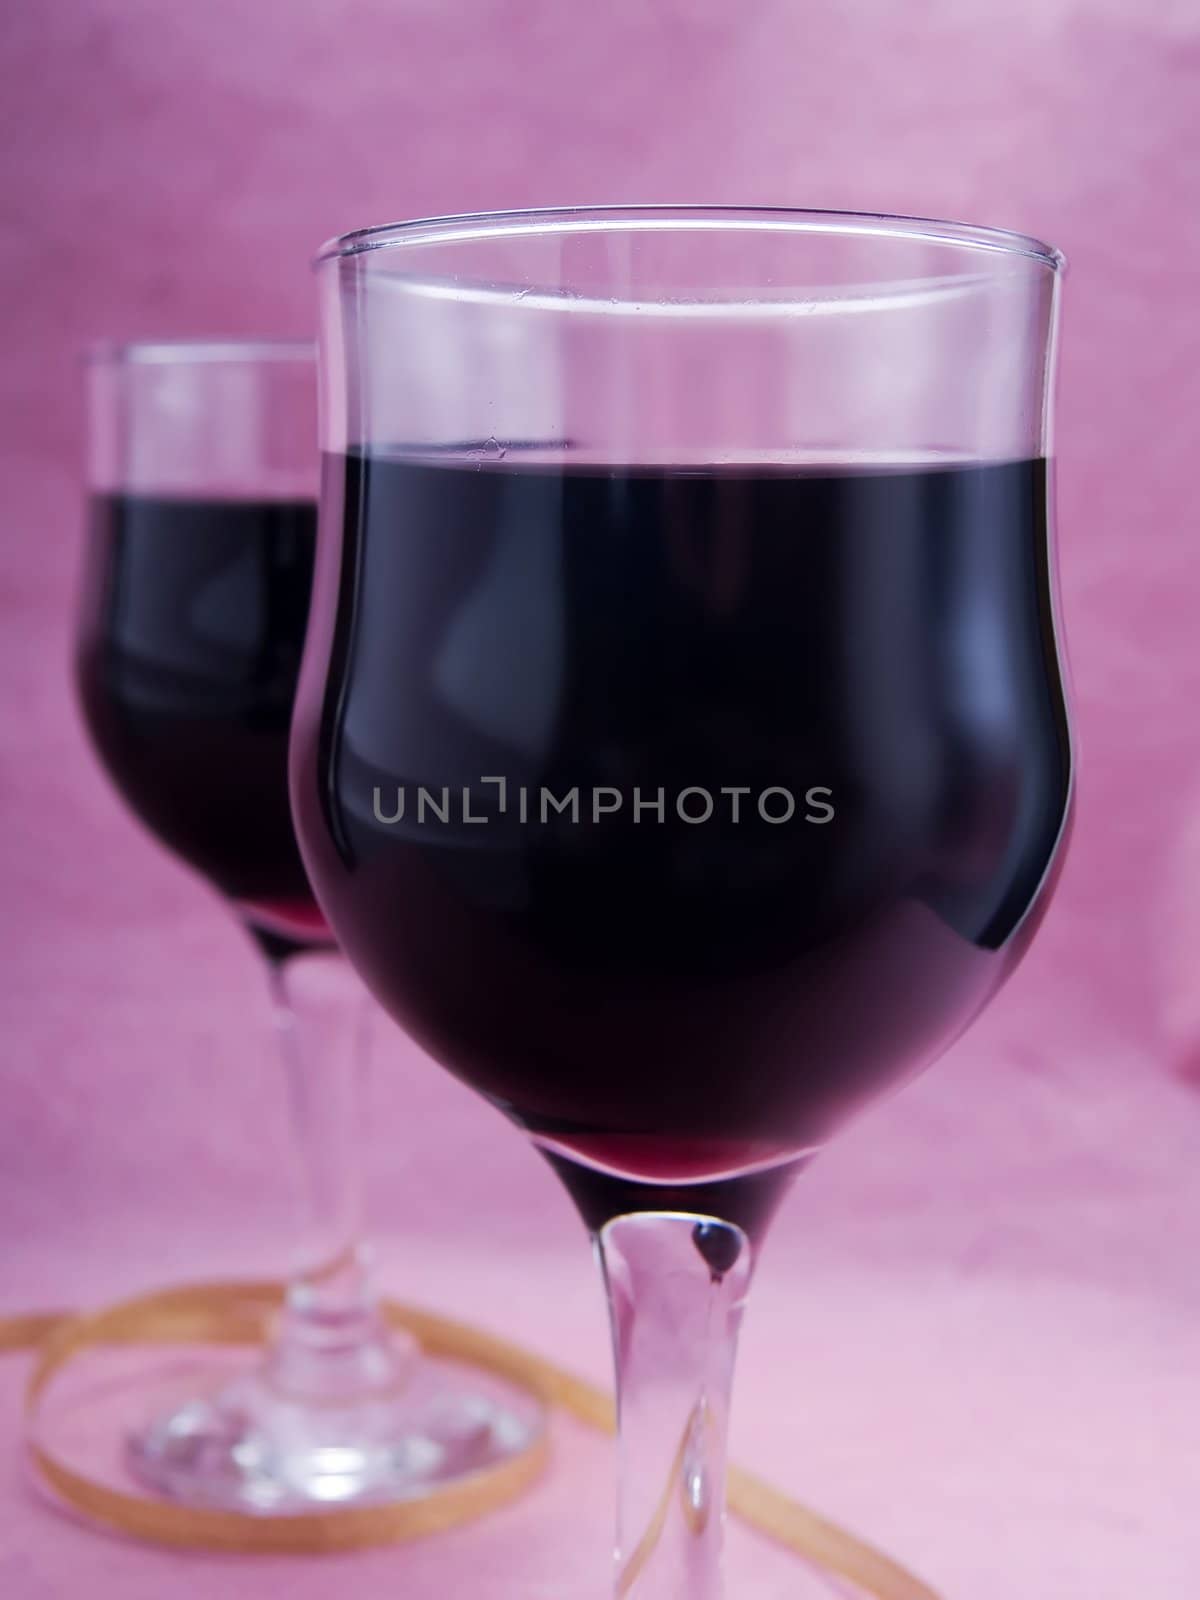 Two glasses of wine by henrischmit